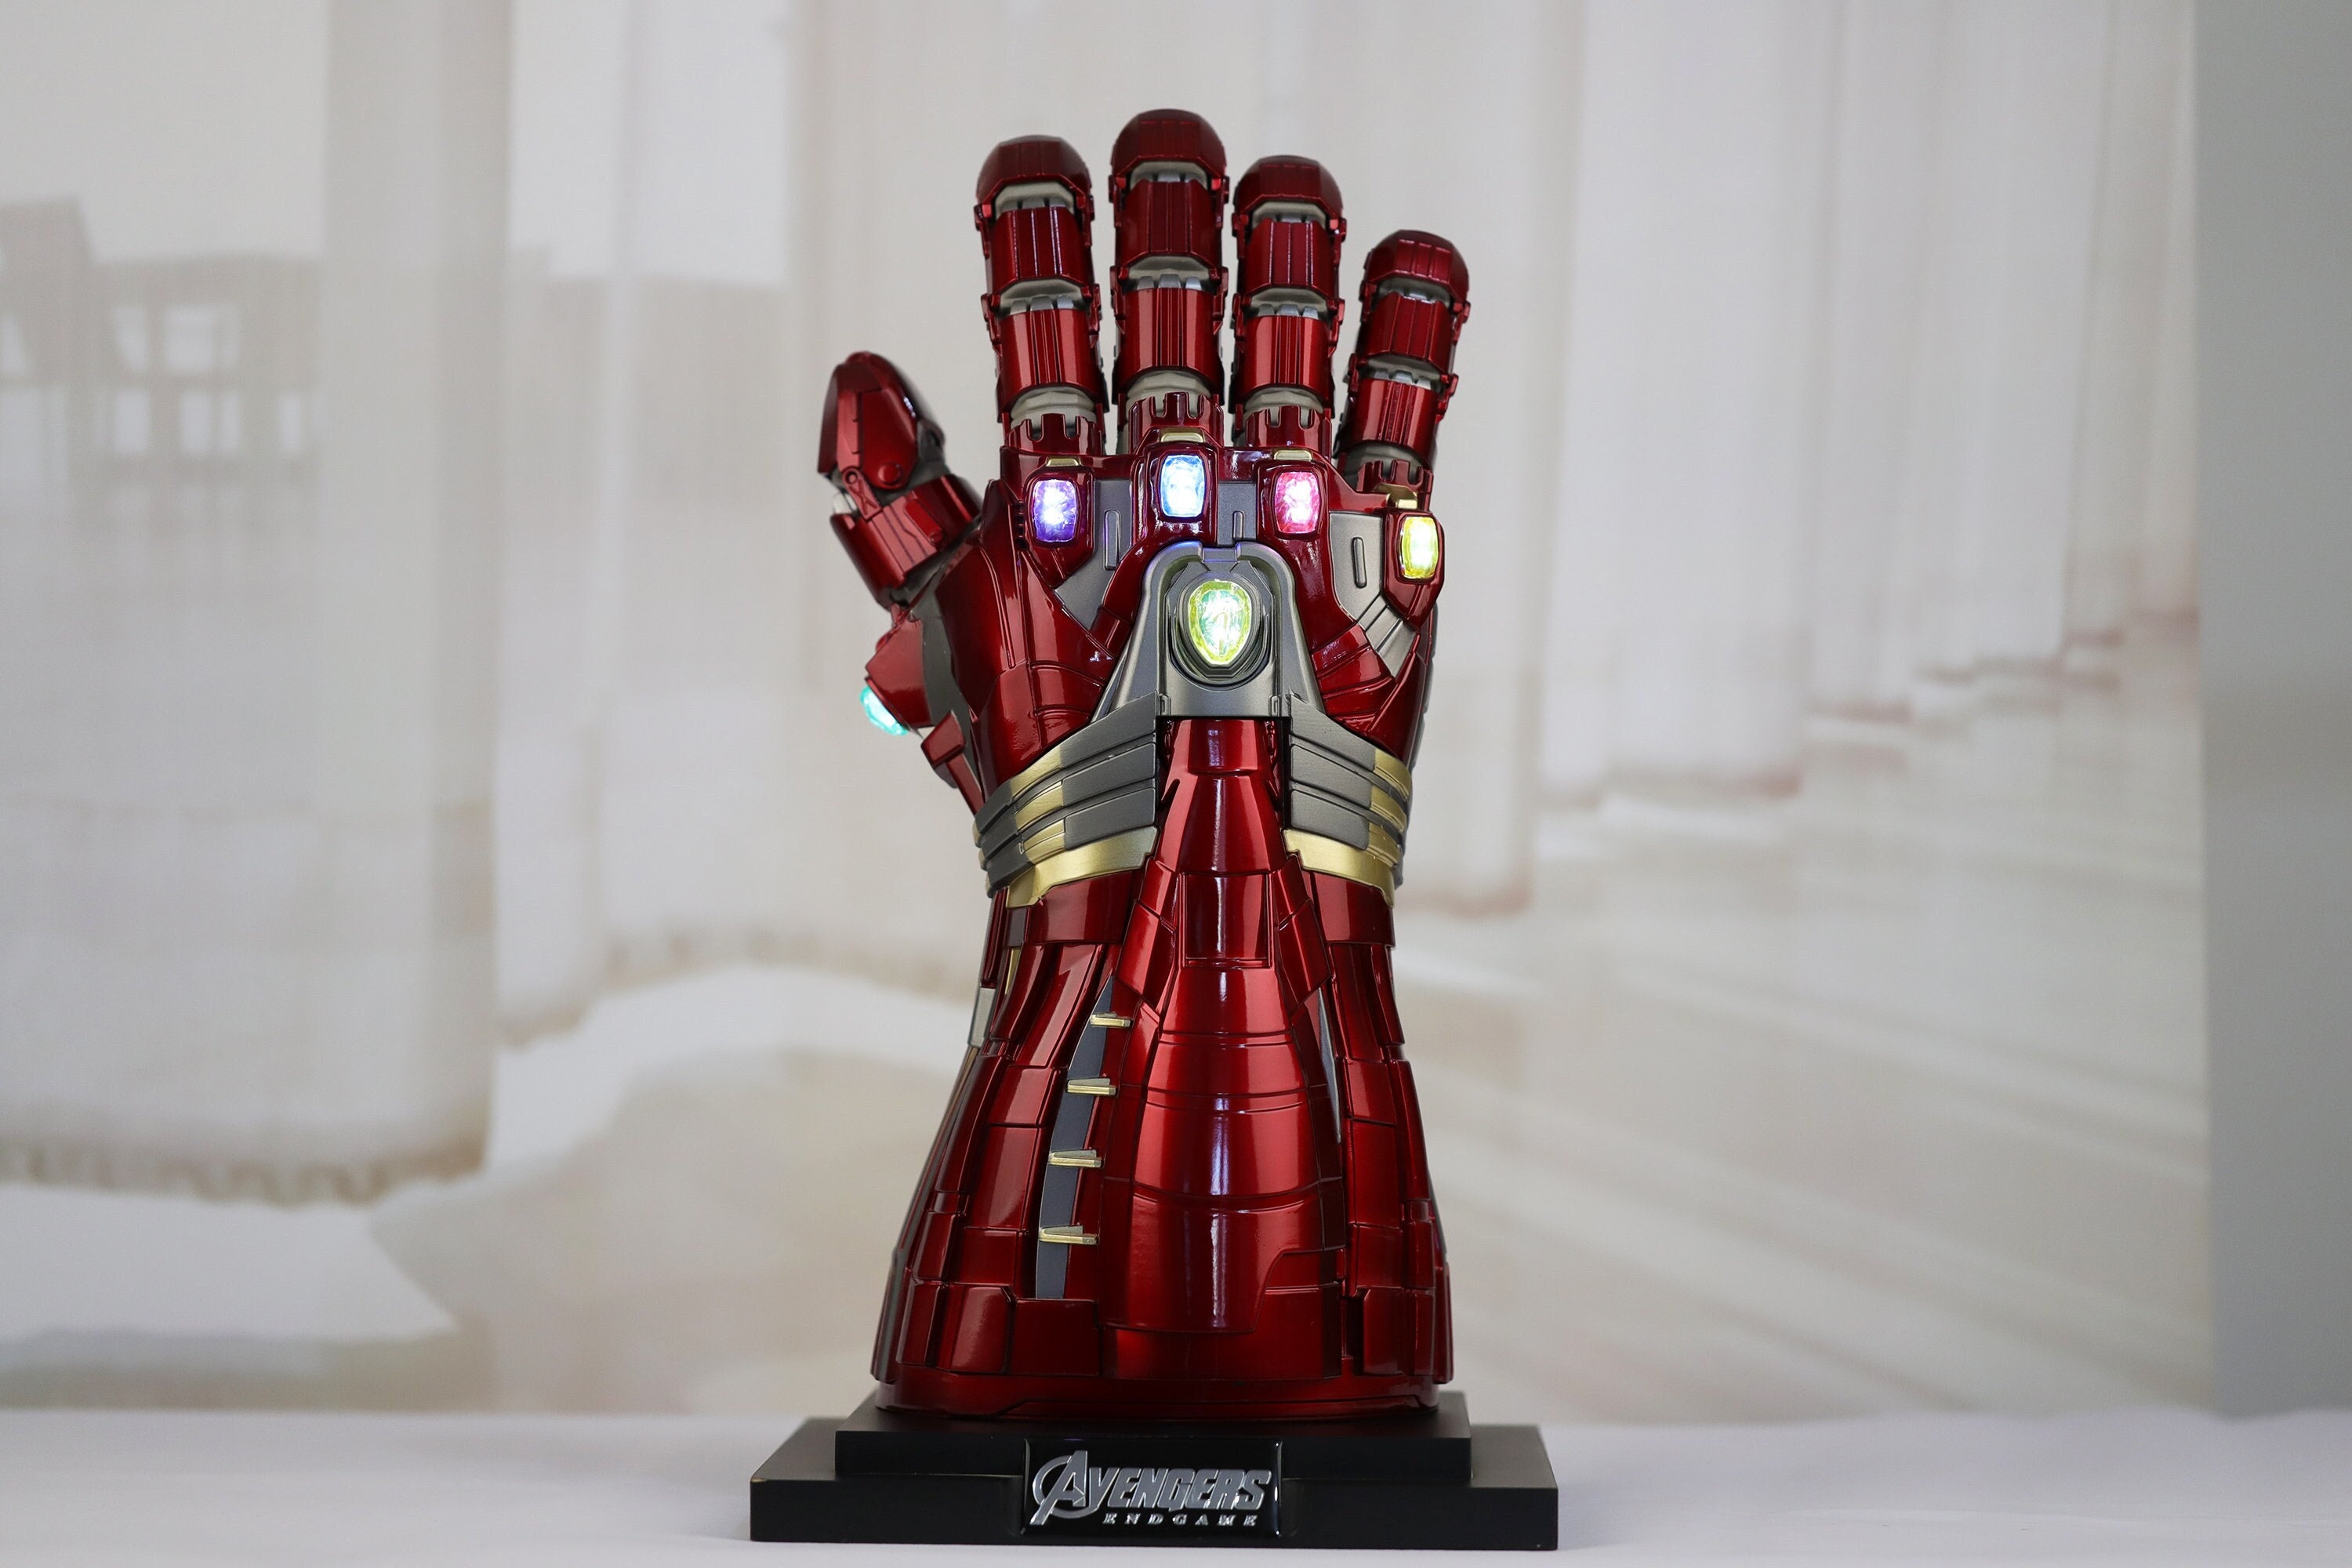 Yacn Iron Man Infinity Gauntlet for Kids,6 Separable Magnet Infinity Stones,Iron Man Gloves Costume,Electronic Fist Halloween Cosplay Props 